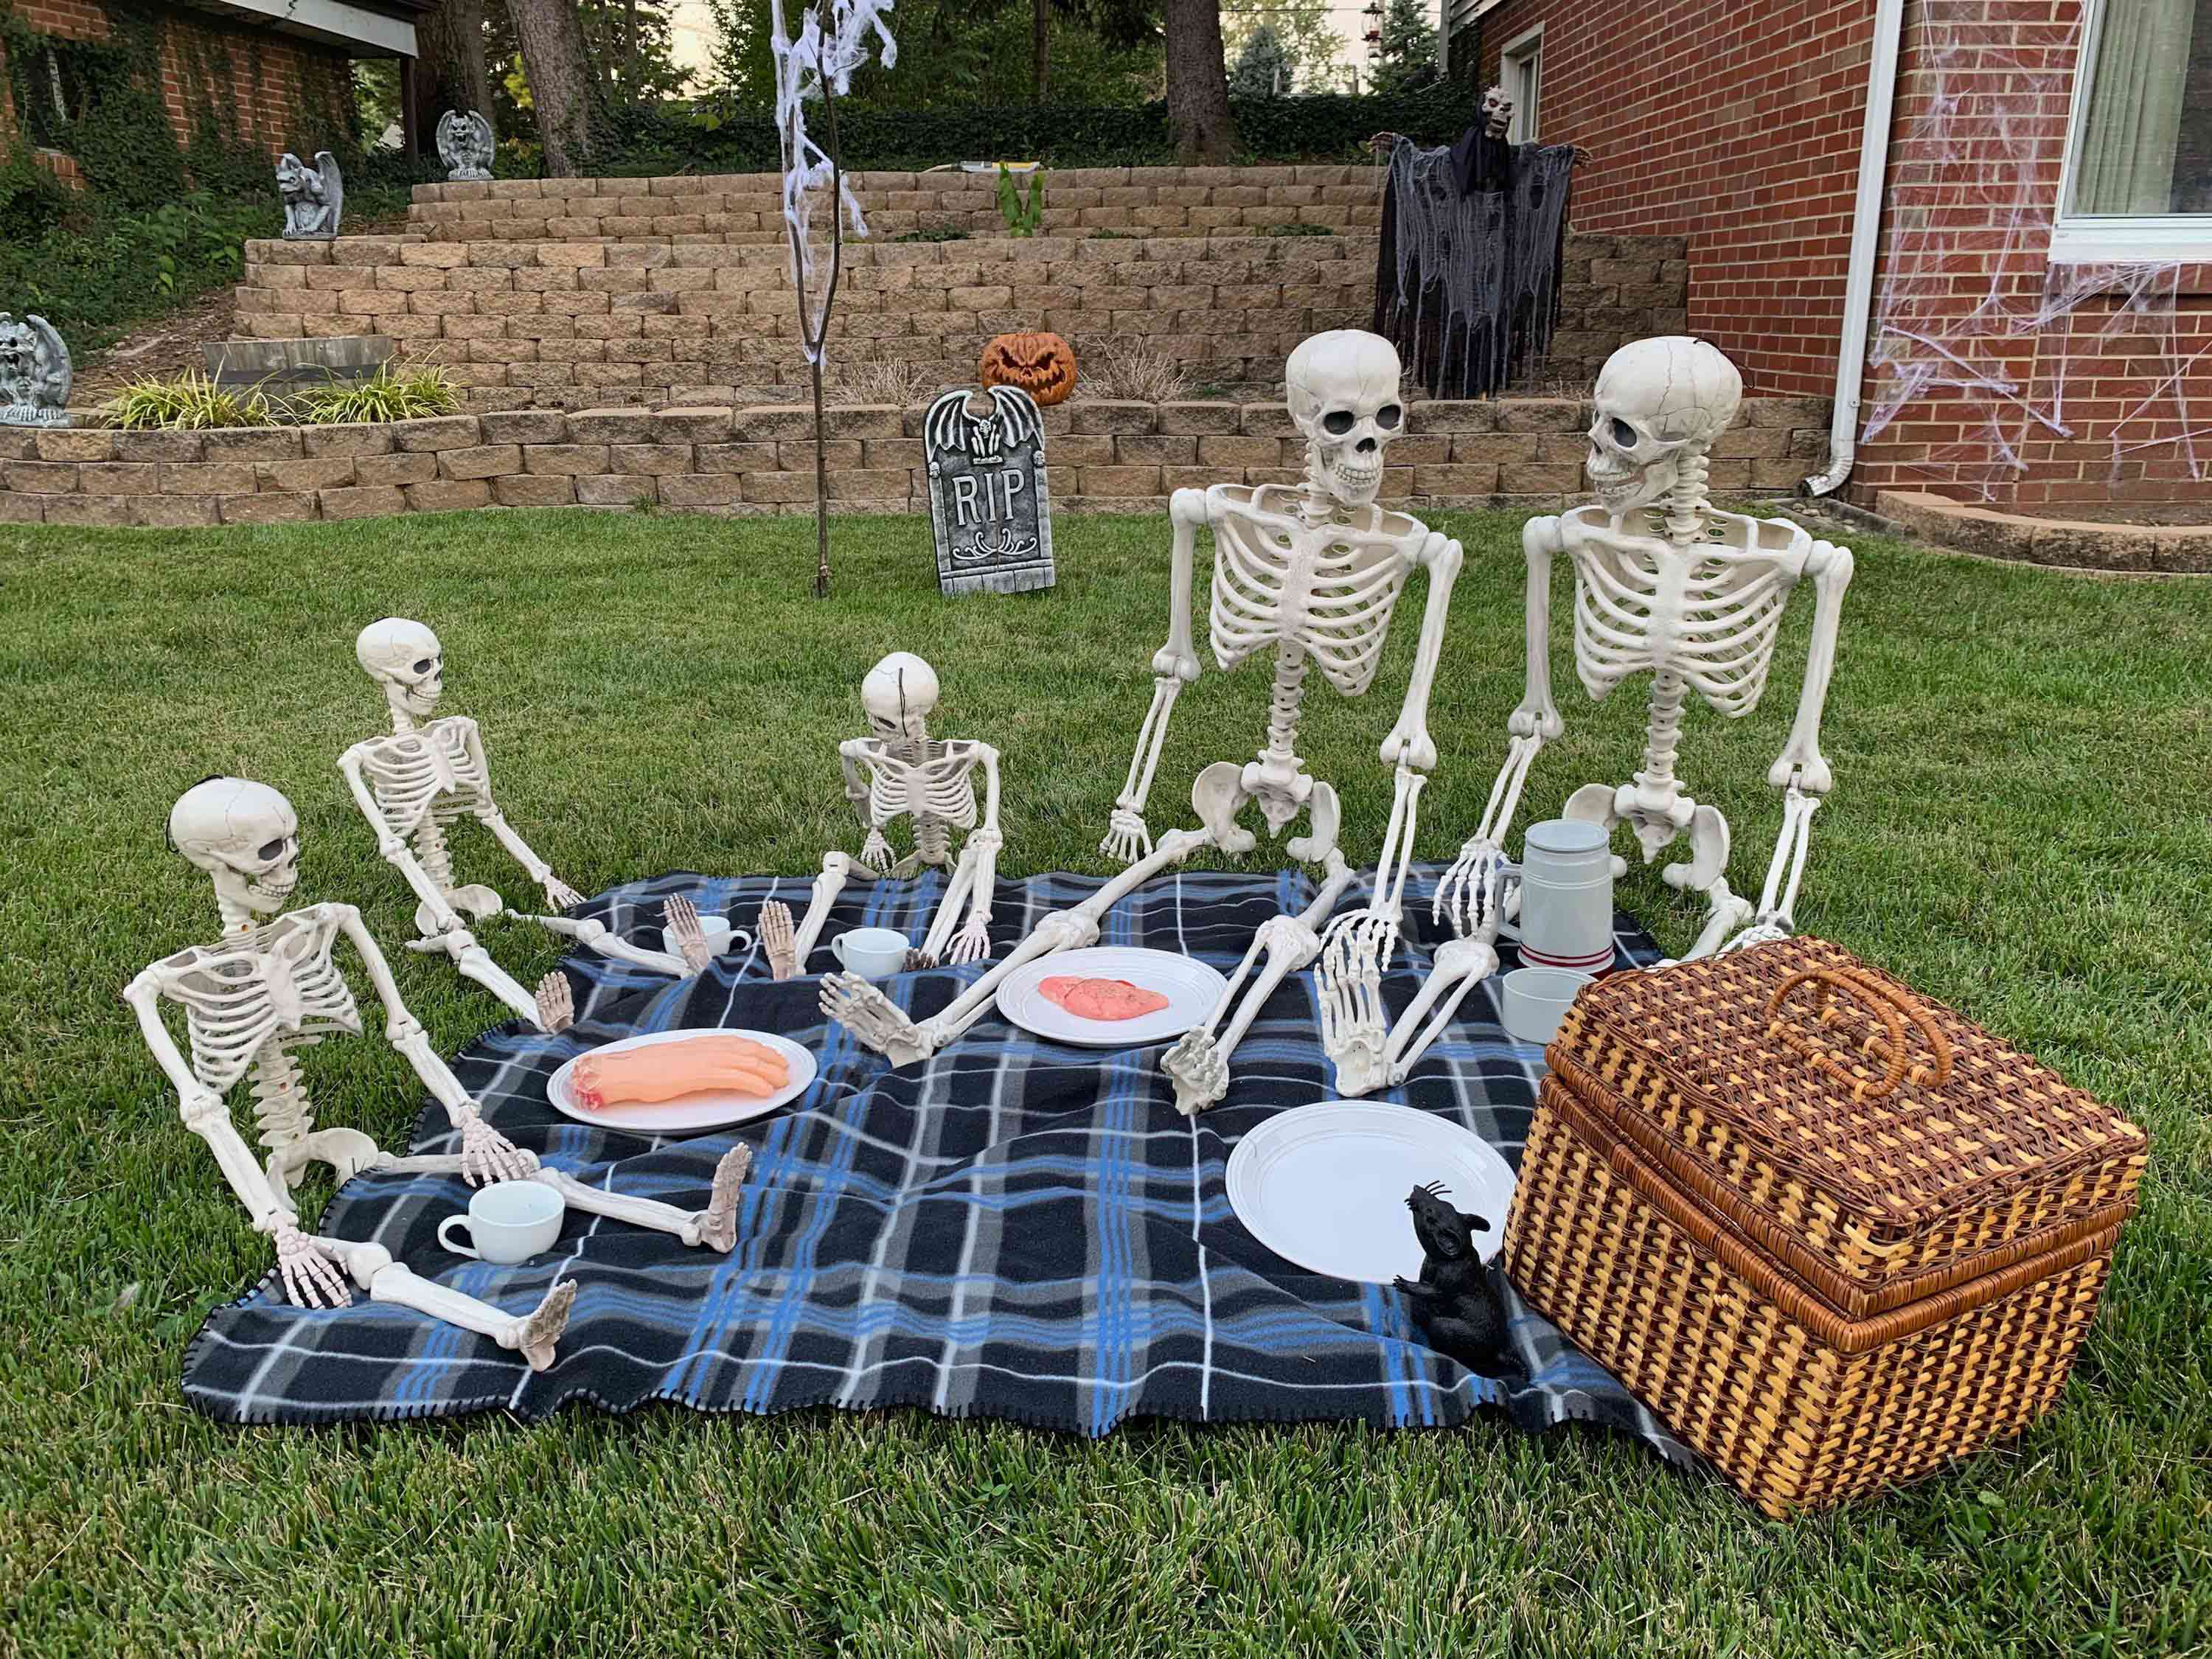 The Skeleton family is having a picnic in the yard